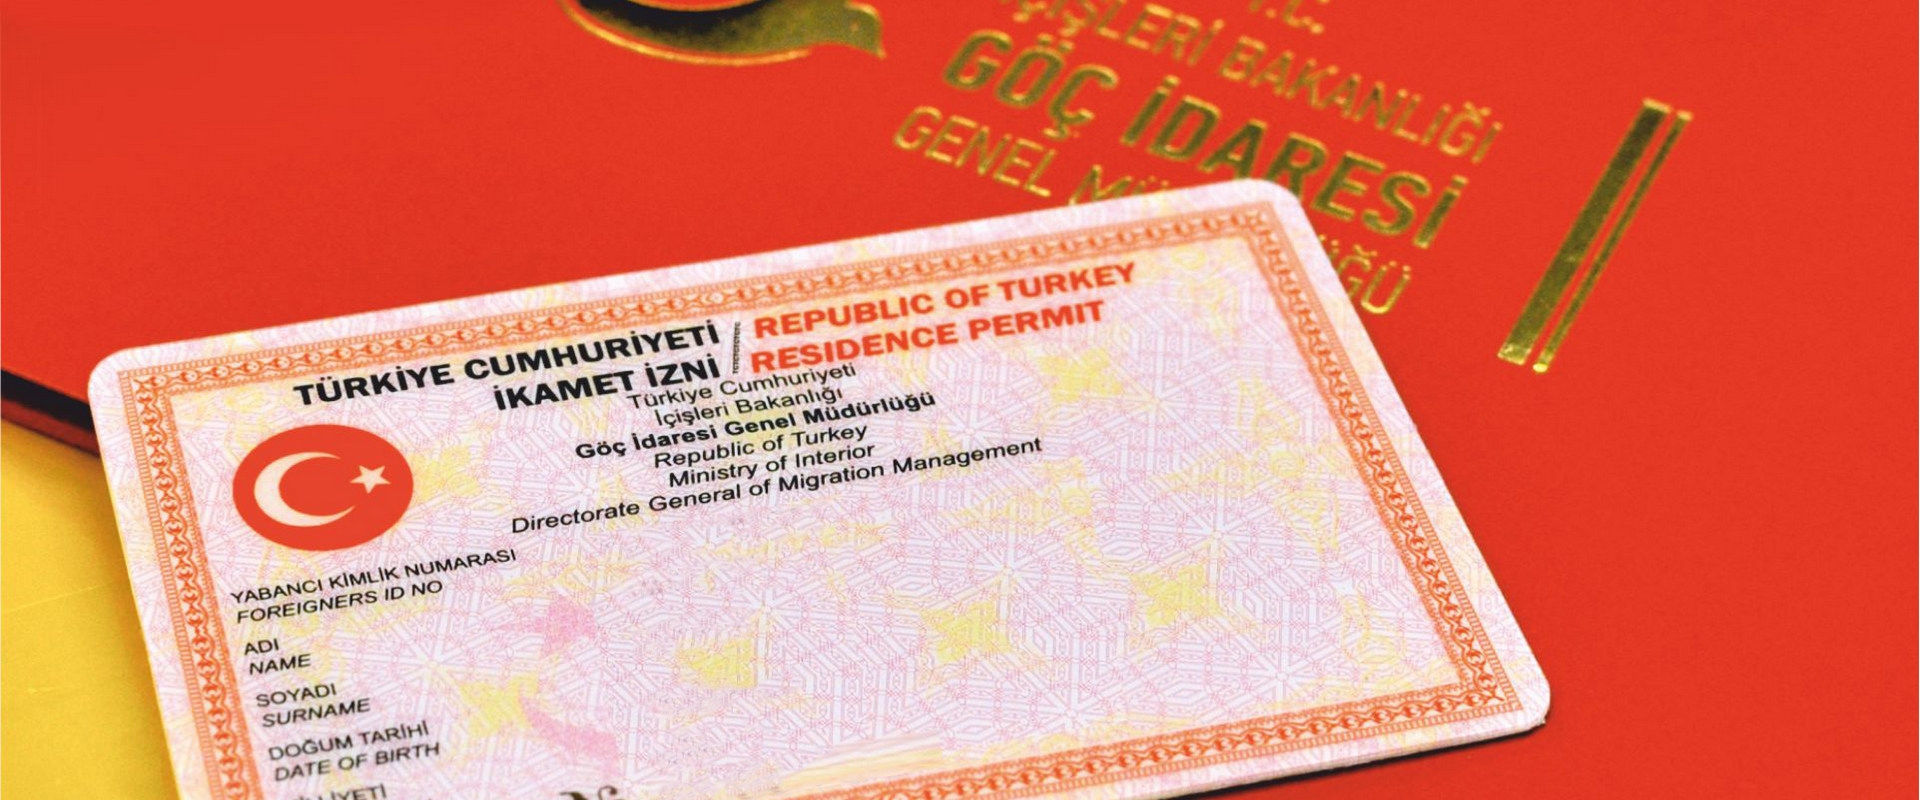 How-to-make-an-appointment-and-What-are-the-papers-needed-for-residence-permit-in-Turkey